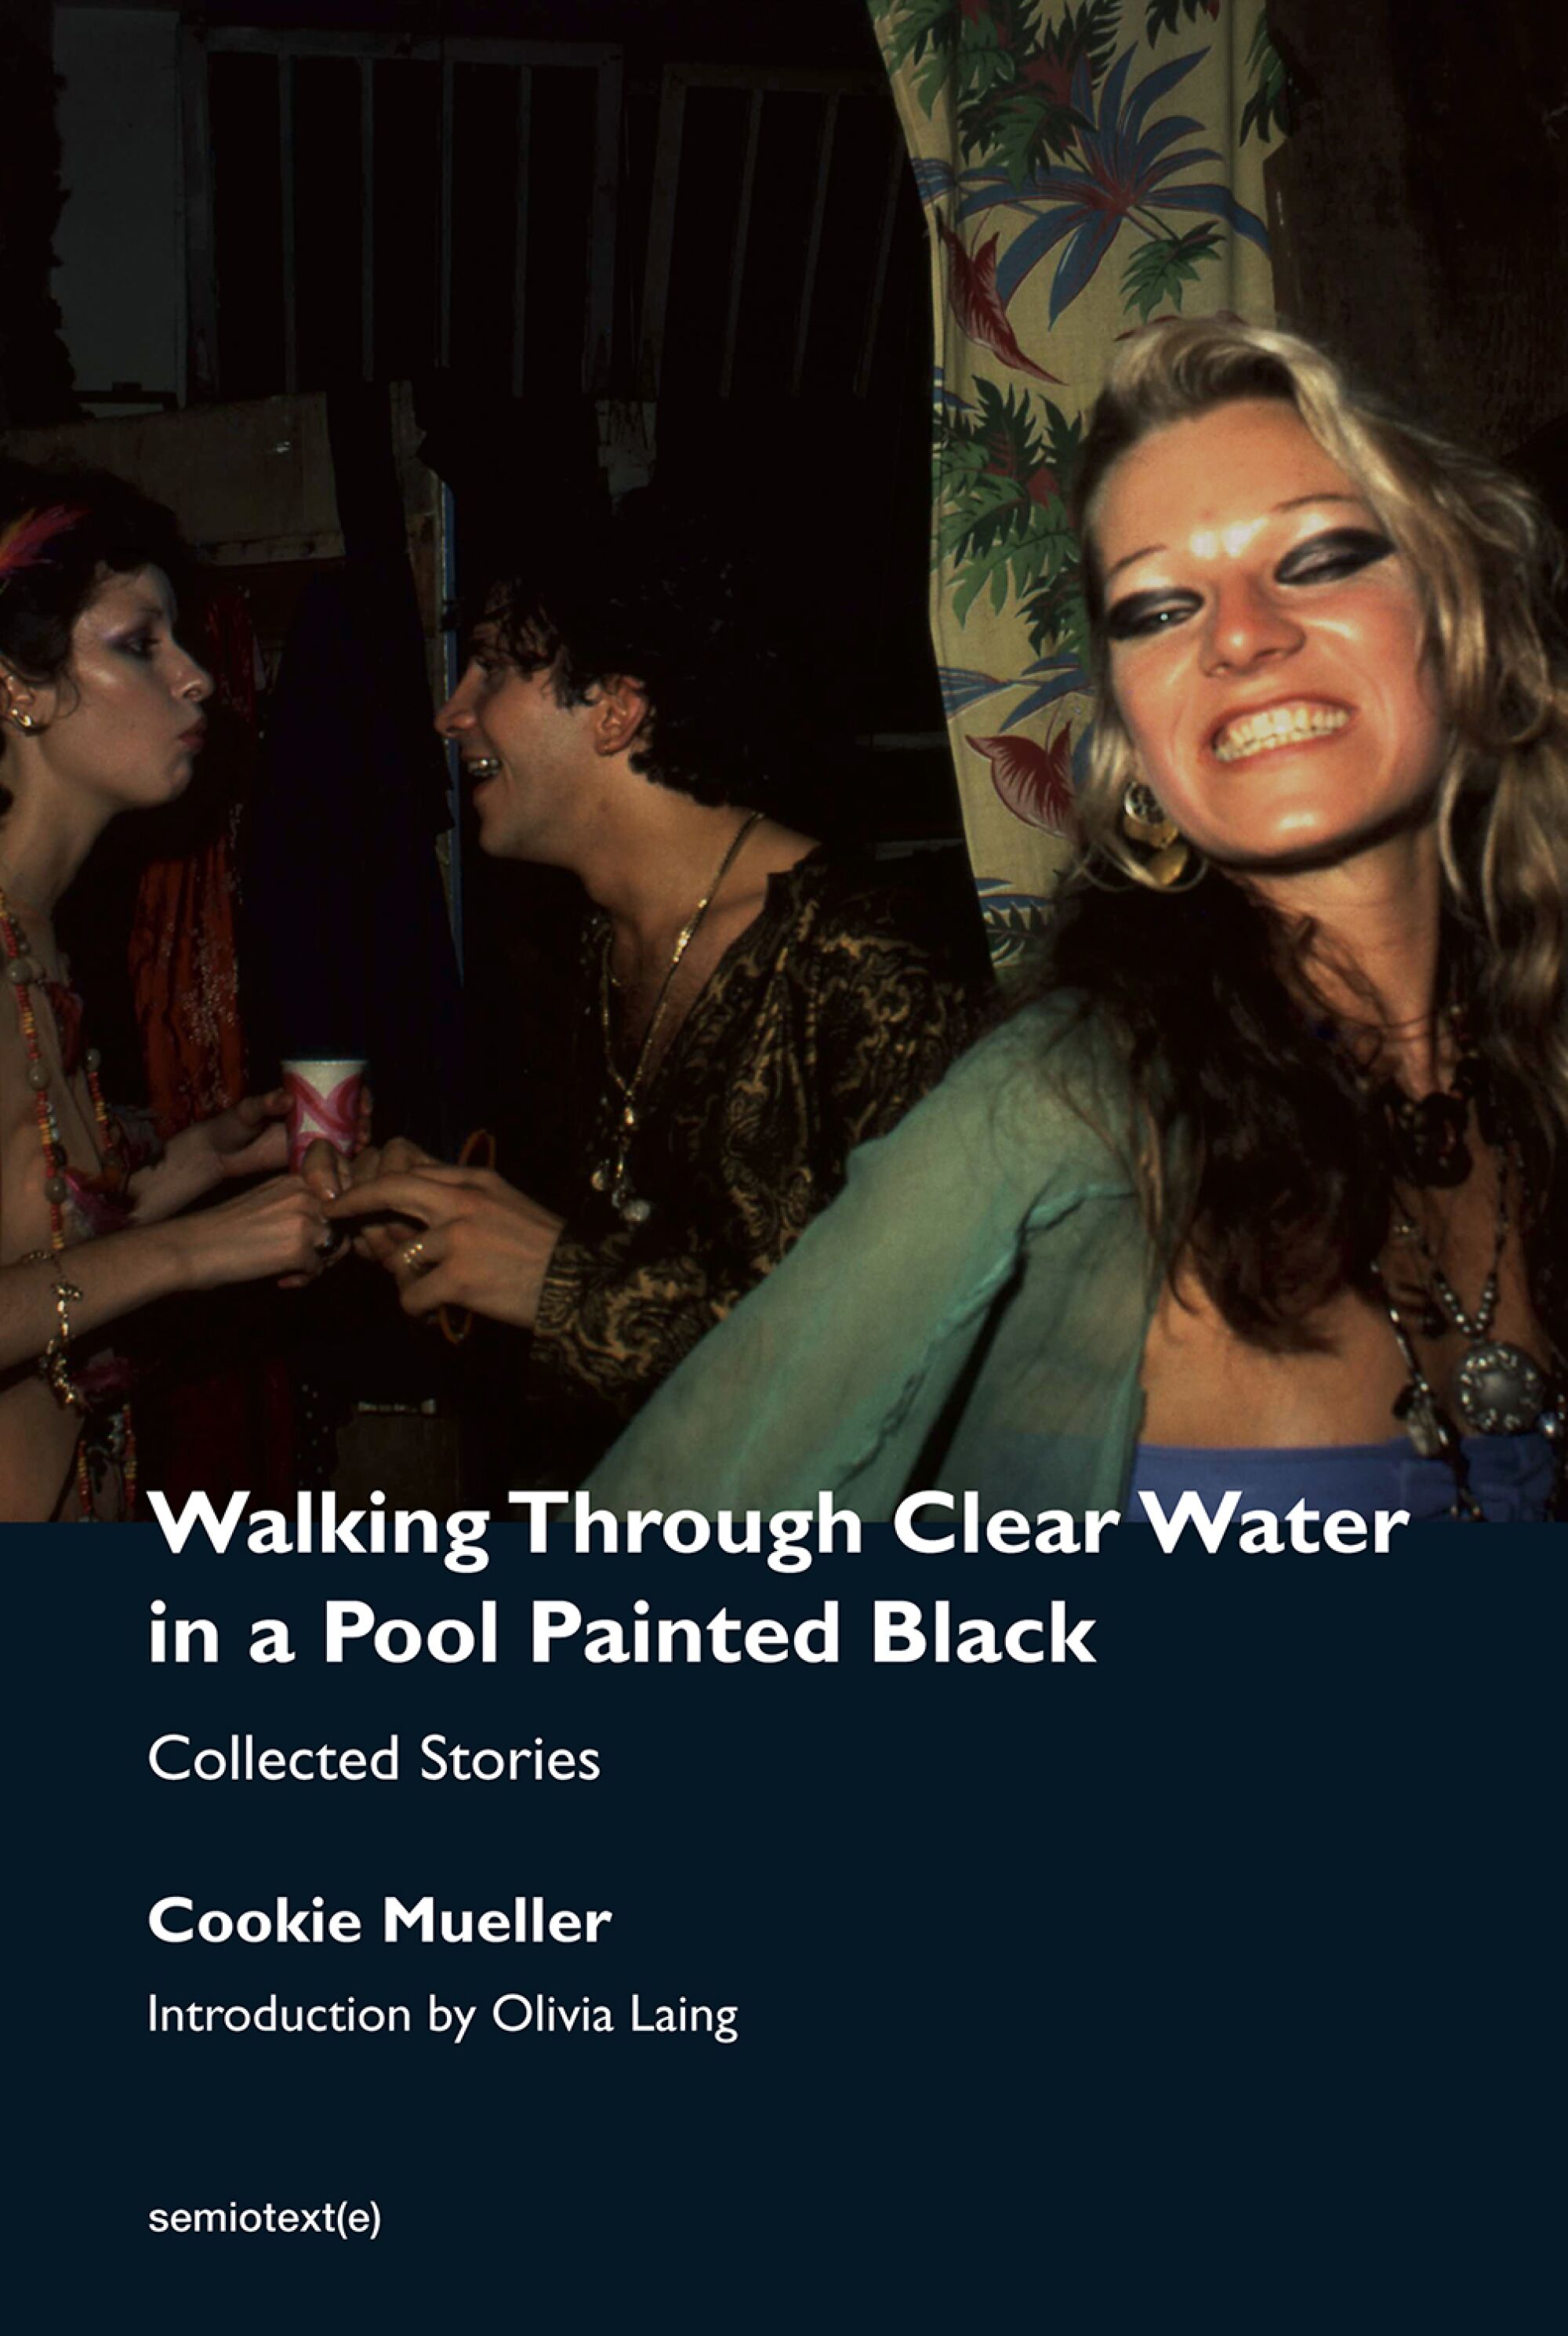 Book jacket of Cookie Mueller's "Walking Through Clear Water in a Pool Painted Black, New Edition: Collected Stories"